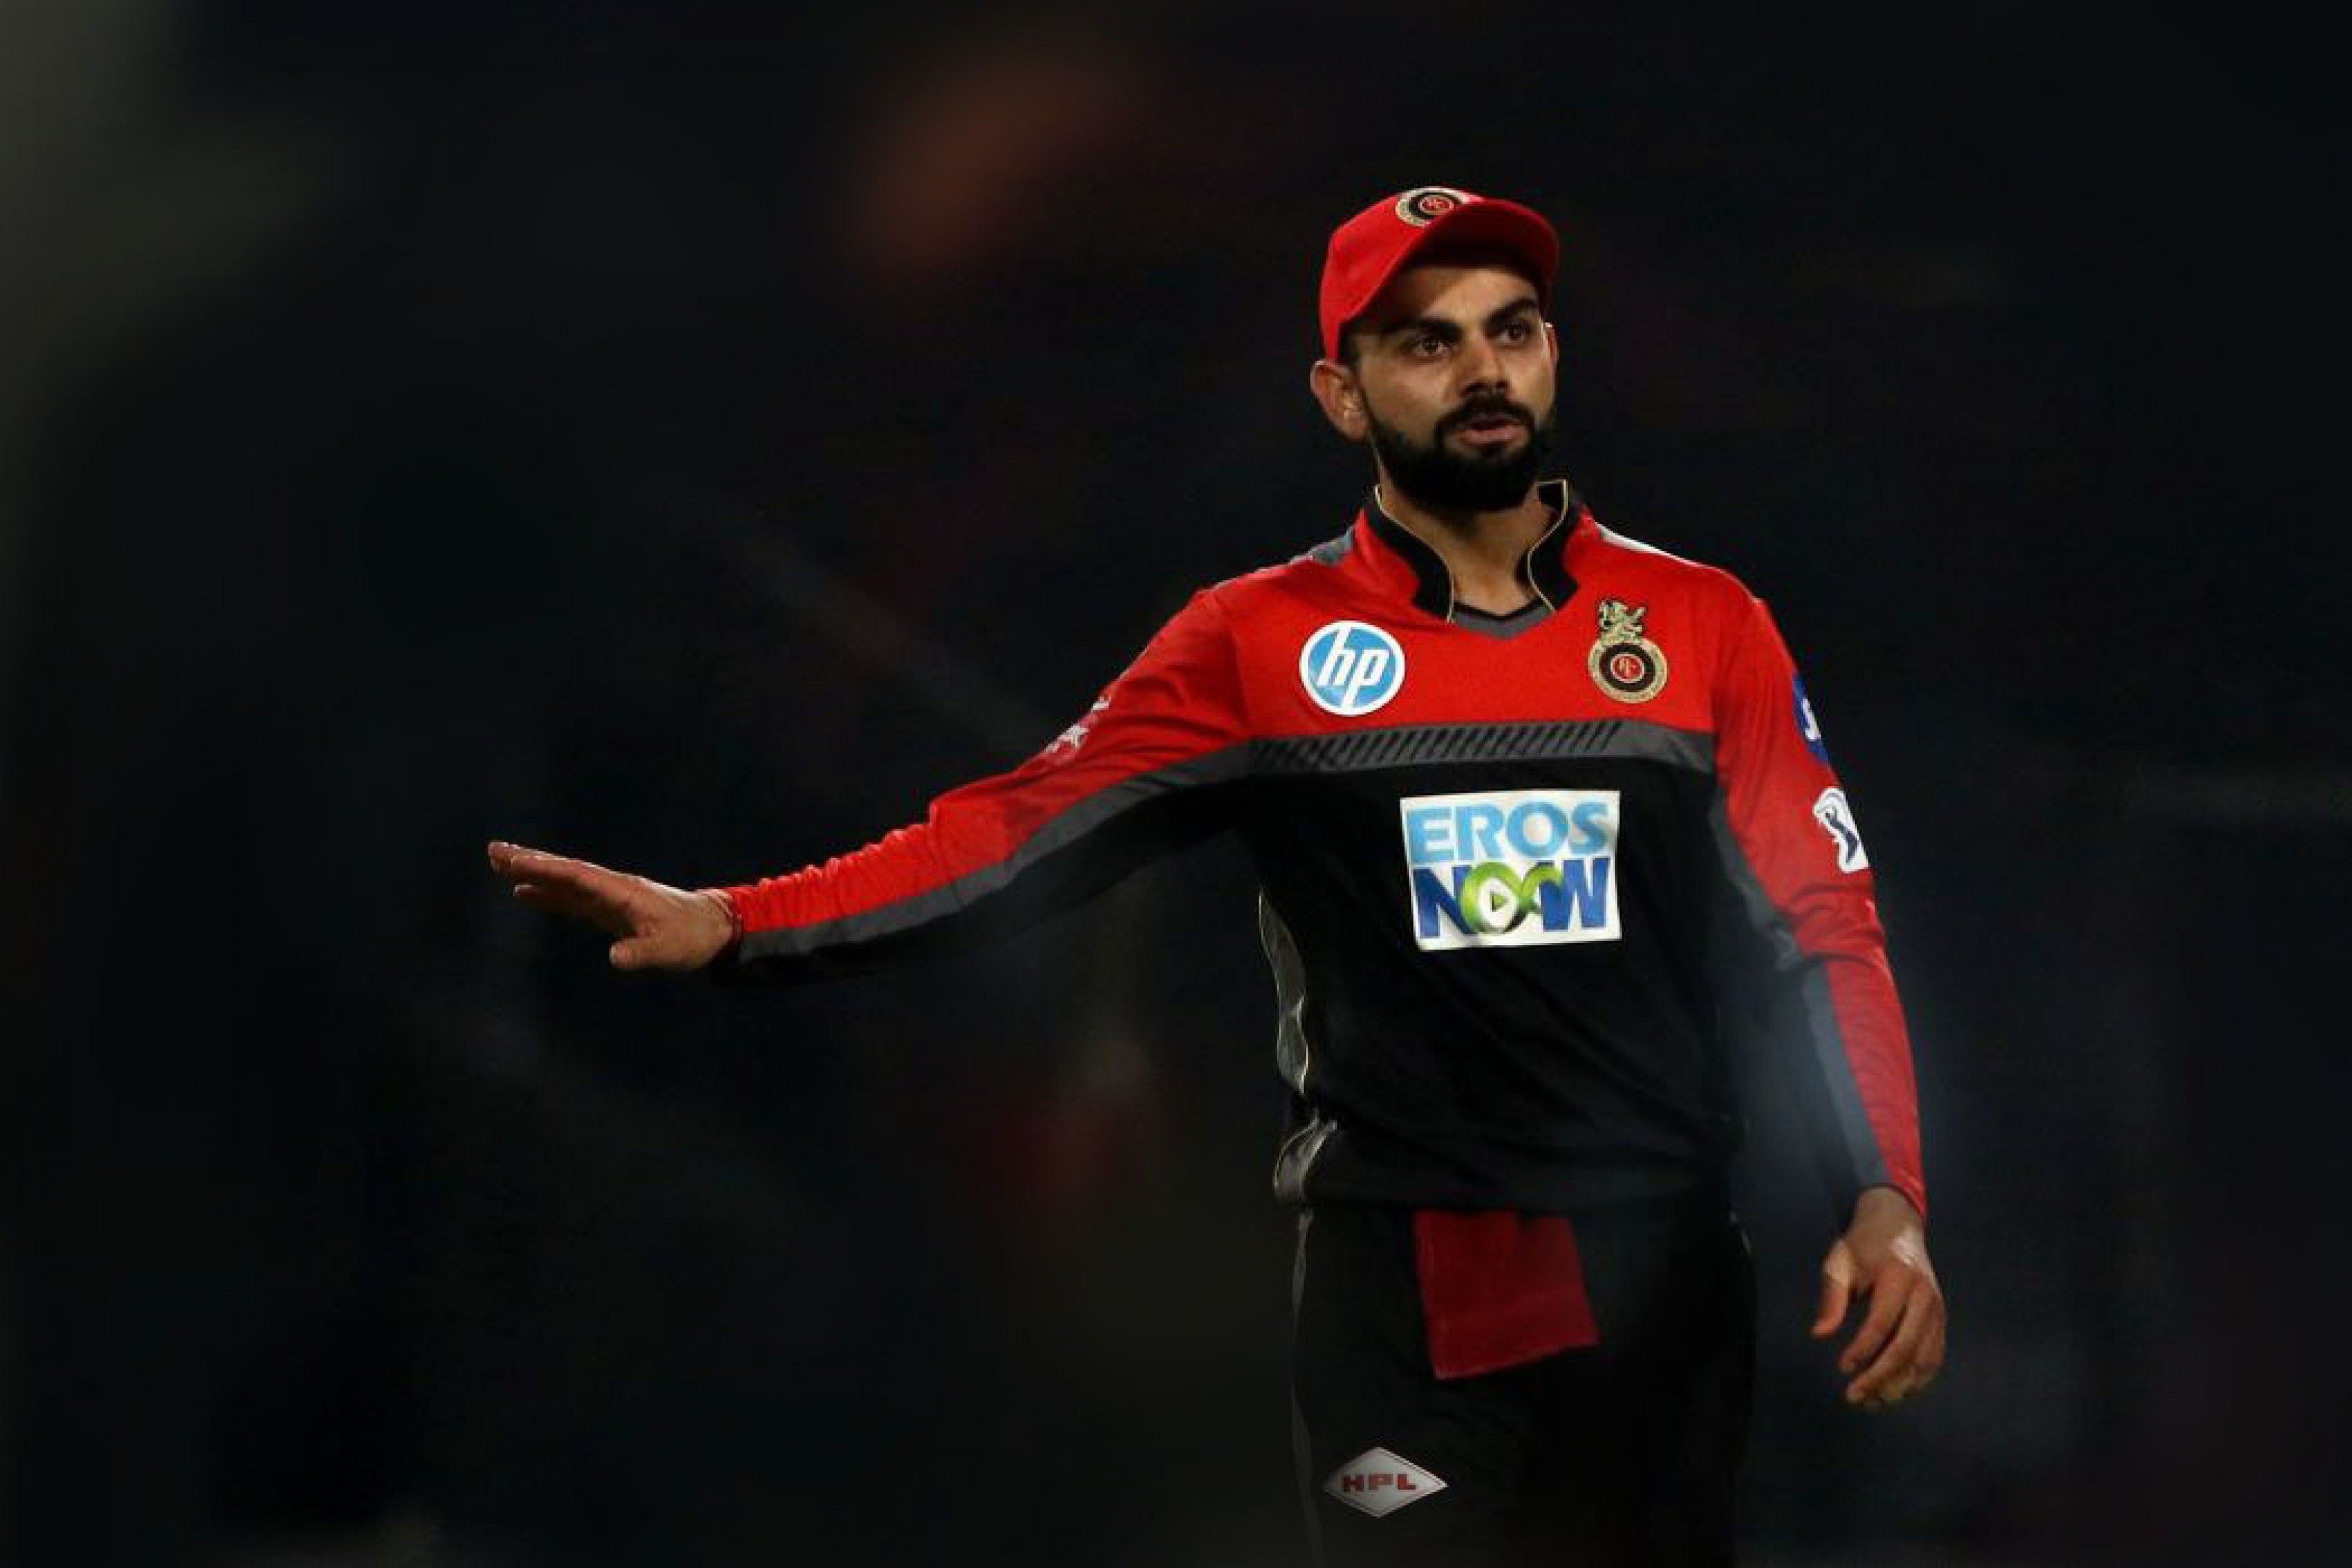 Royal Challengers Bangalore (RCB) HD Wallpapers | 4K Backgrounds -  Wallpapers Den